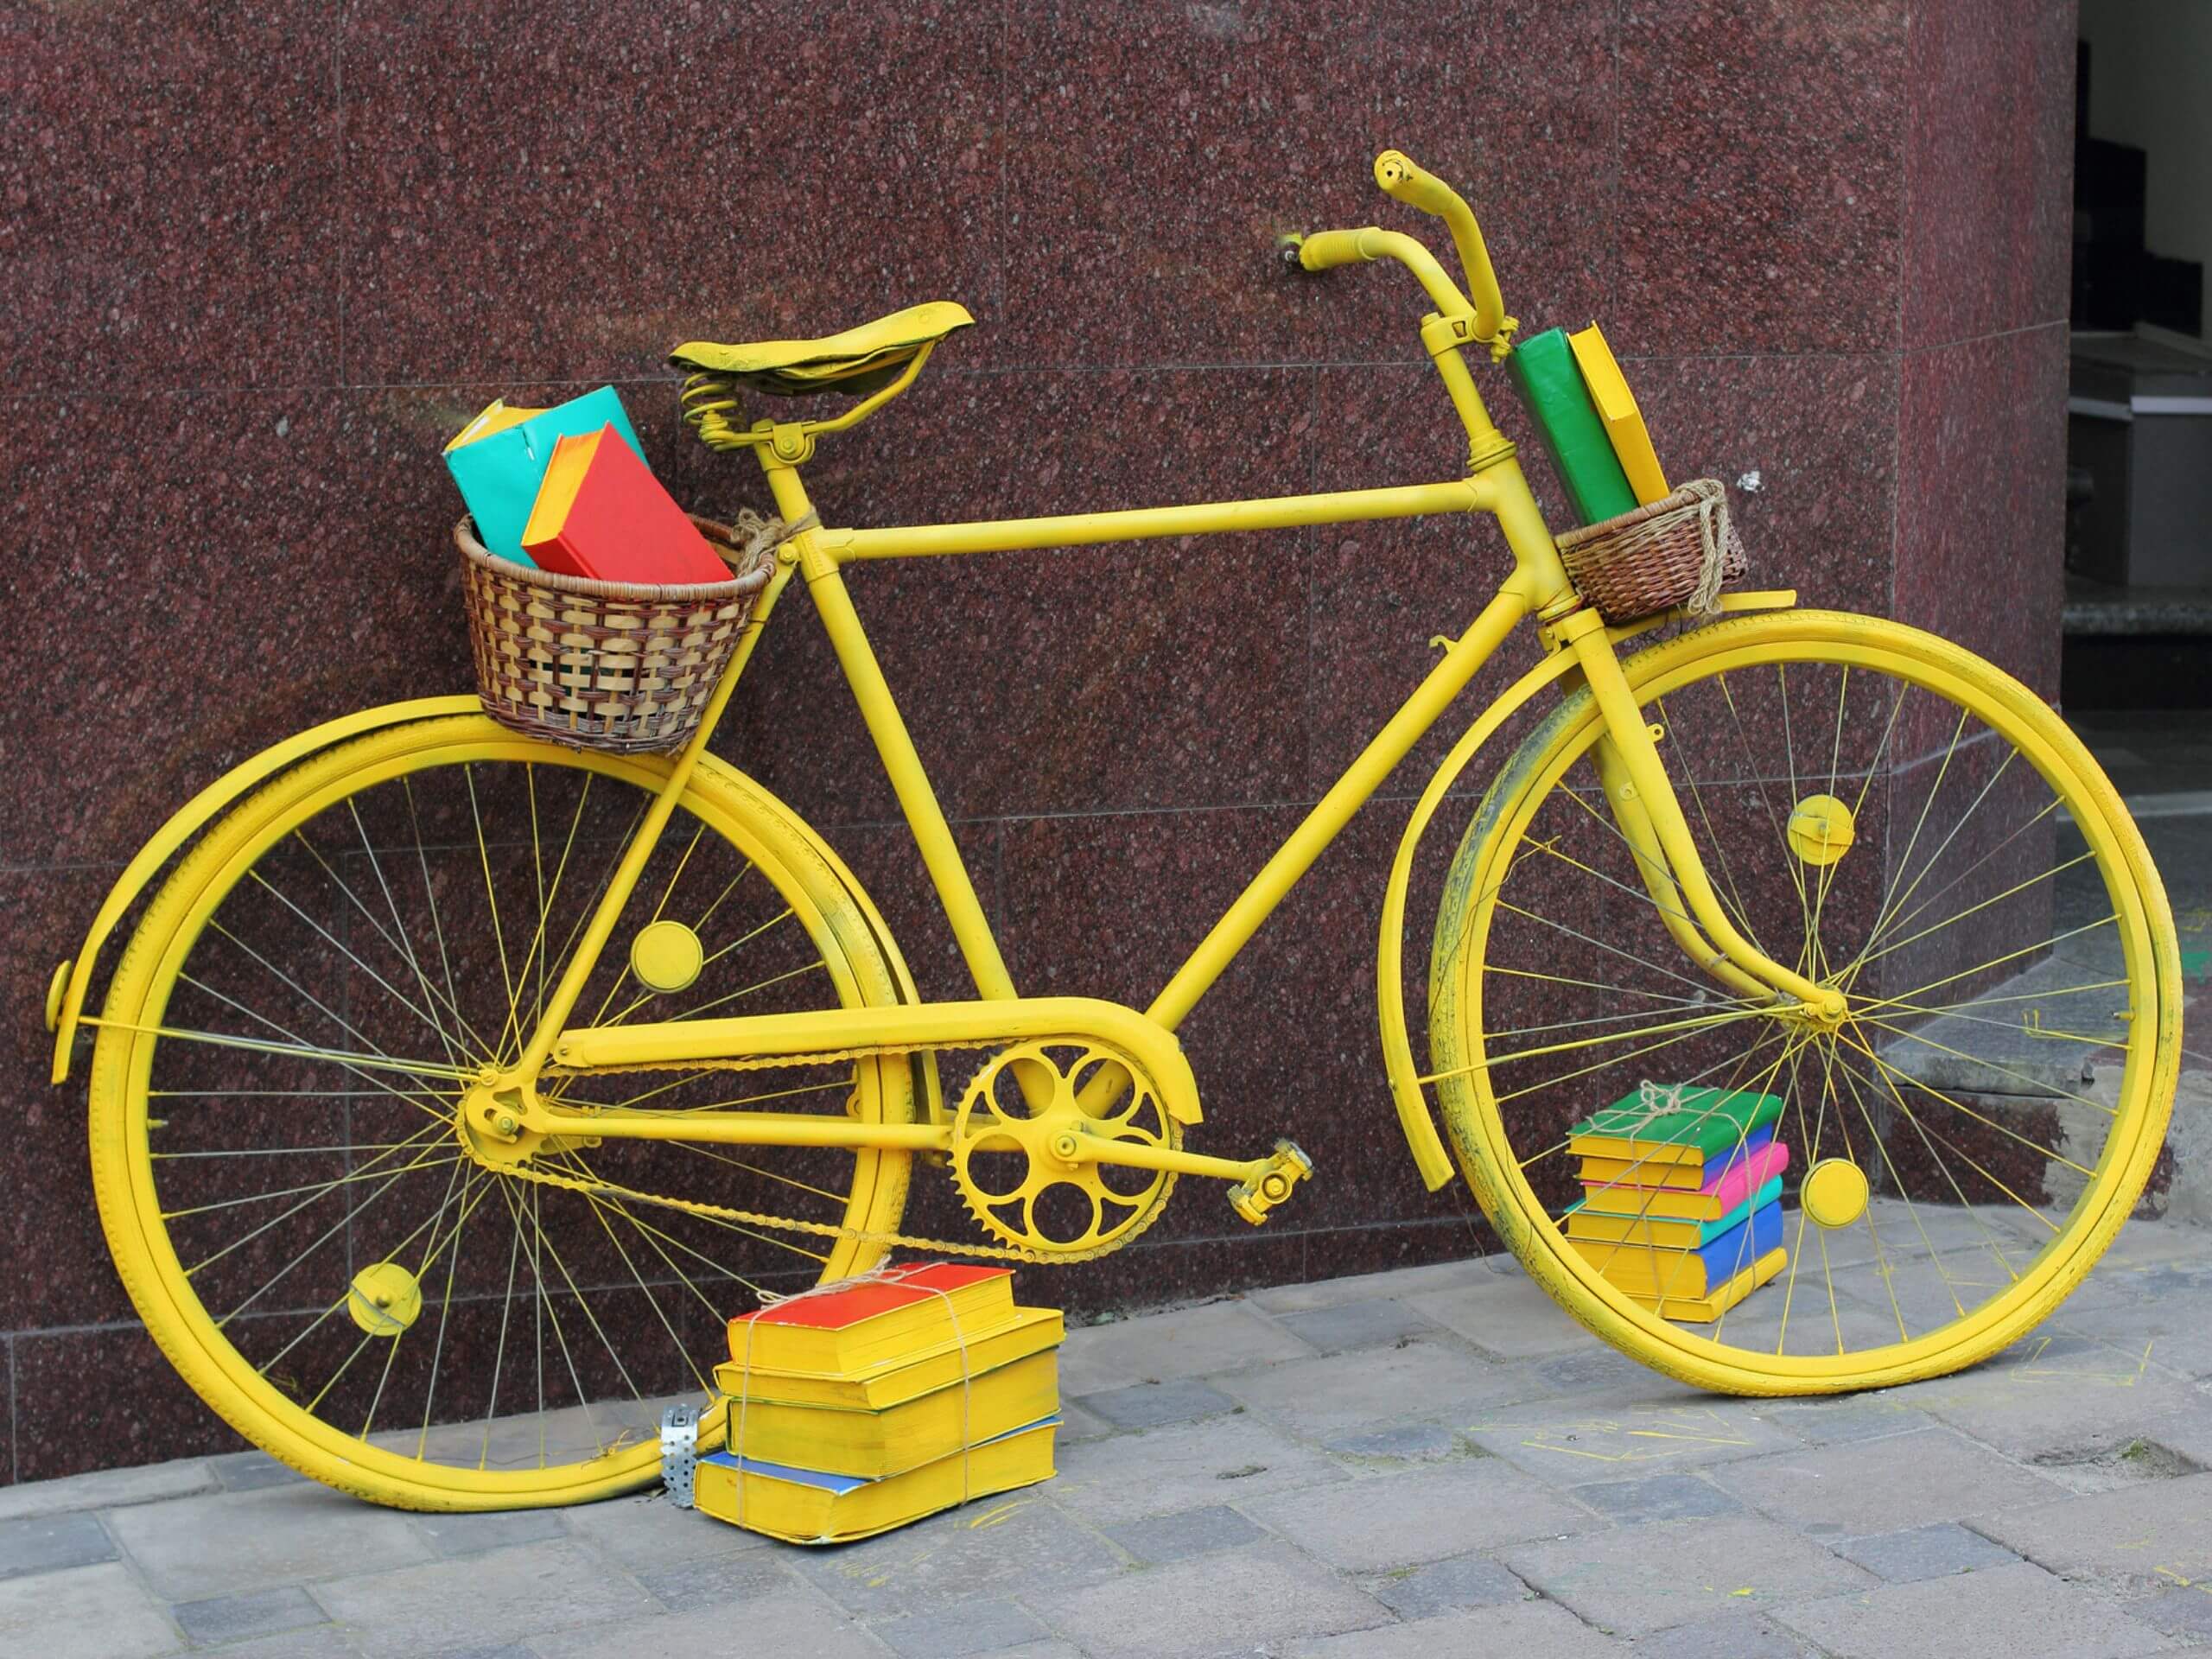 bicycle leans against brick wall. The entire bike is painted bright yellos, including a pile of books sitting beside it.